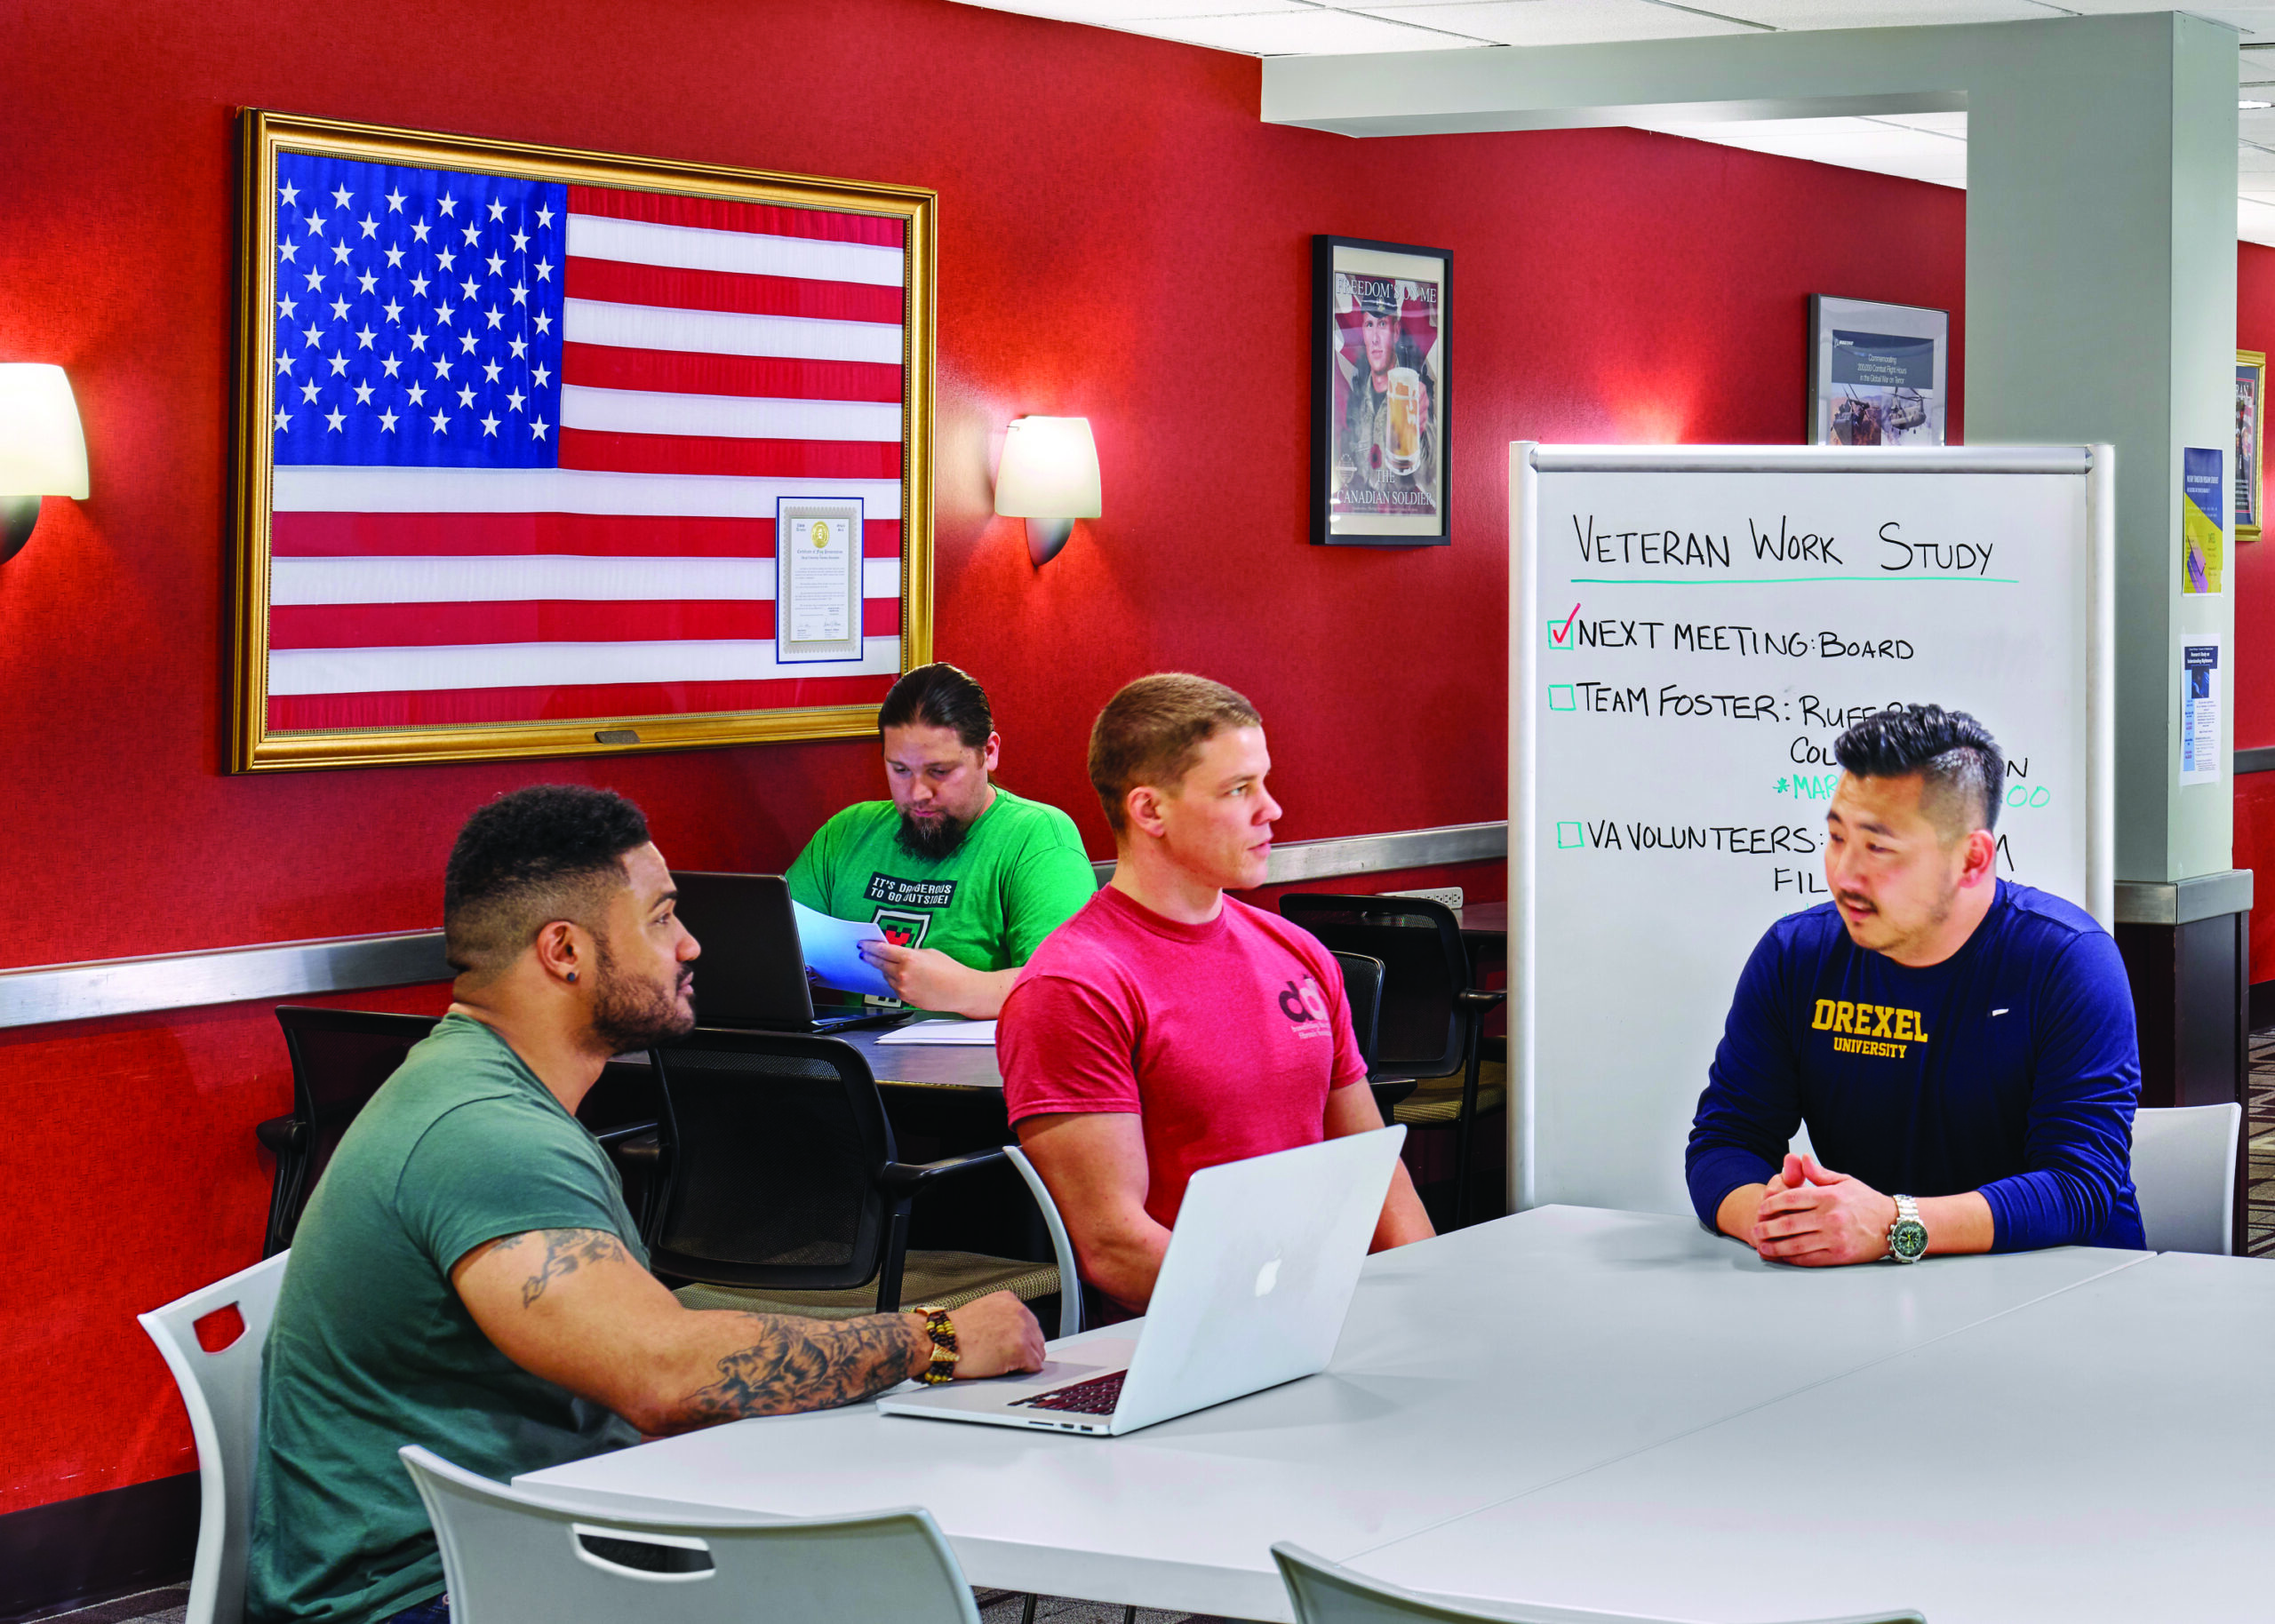 A group of student veterans study and collaborate in a digital mockup of the Student Veterans Lounge.